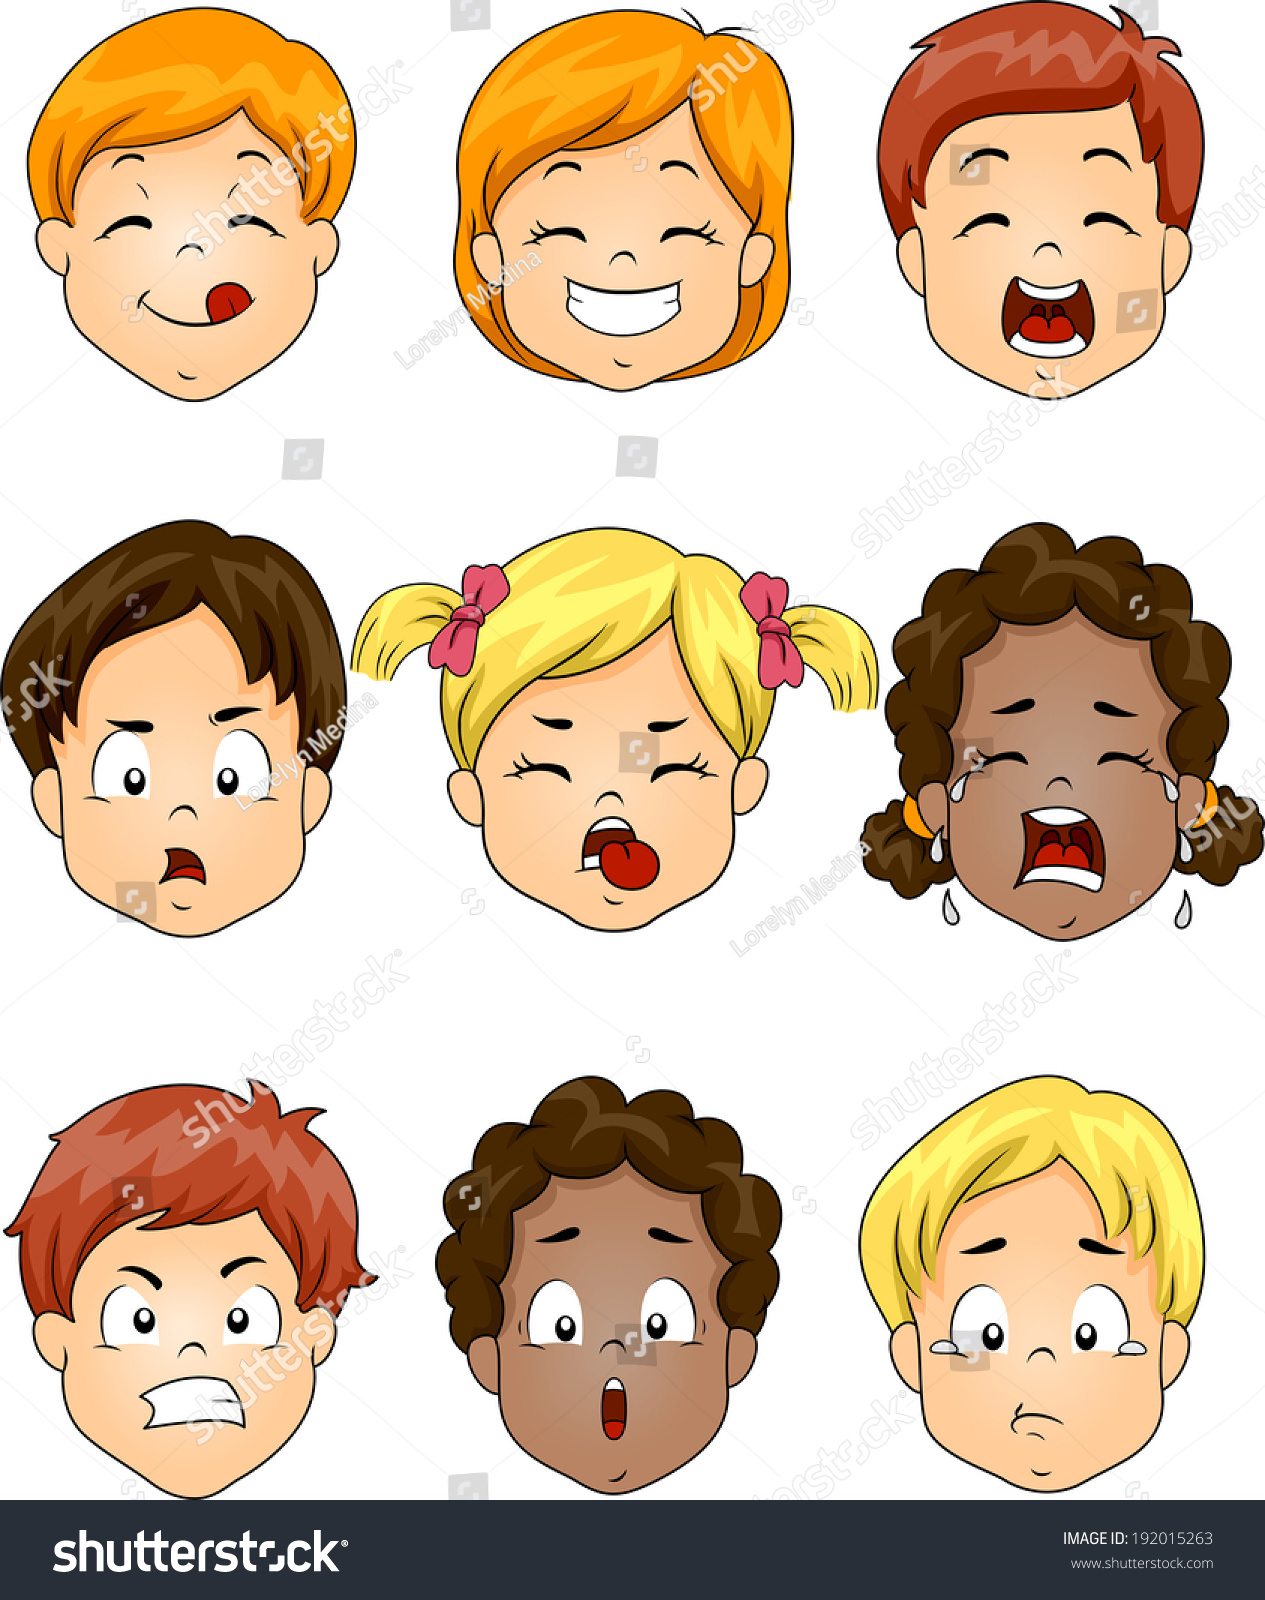 clipart expression emotions - photo #36